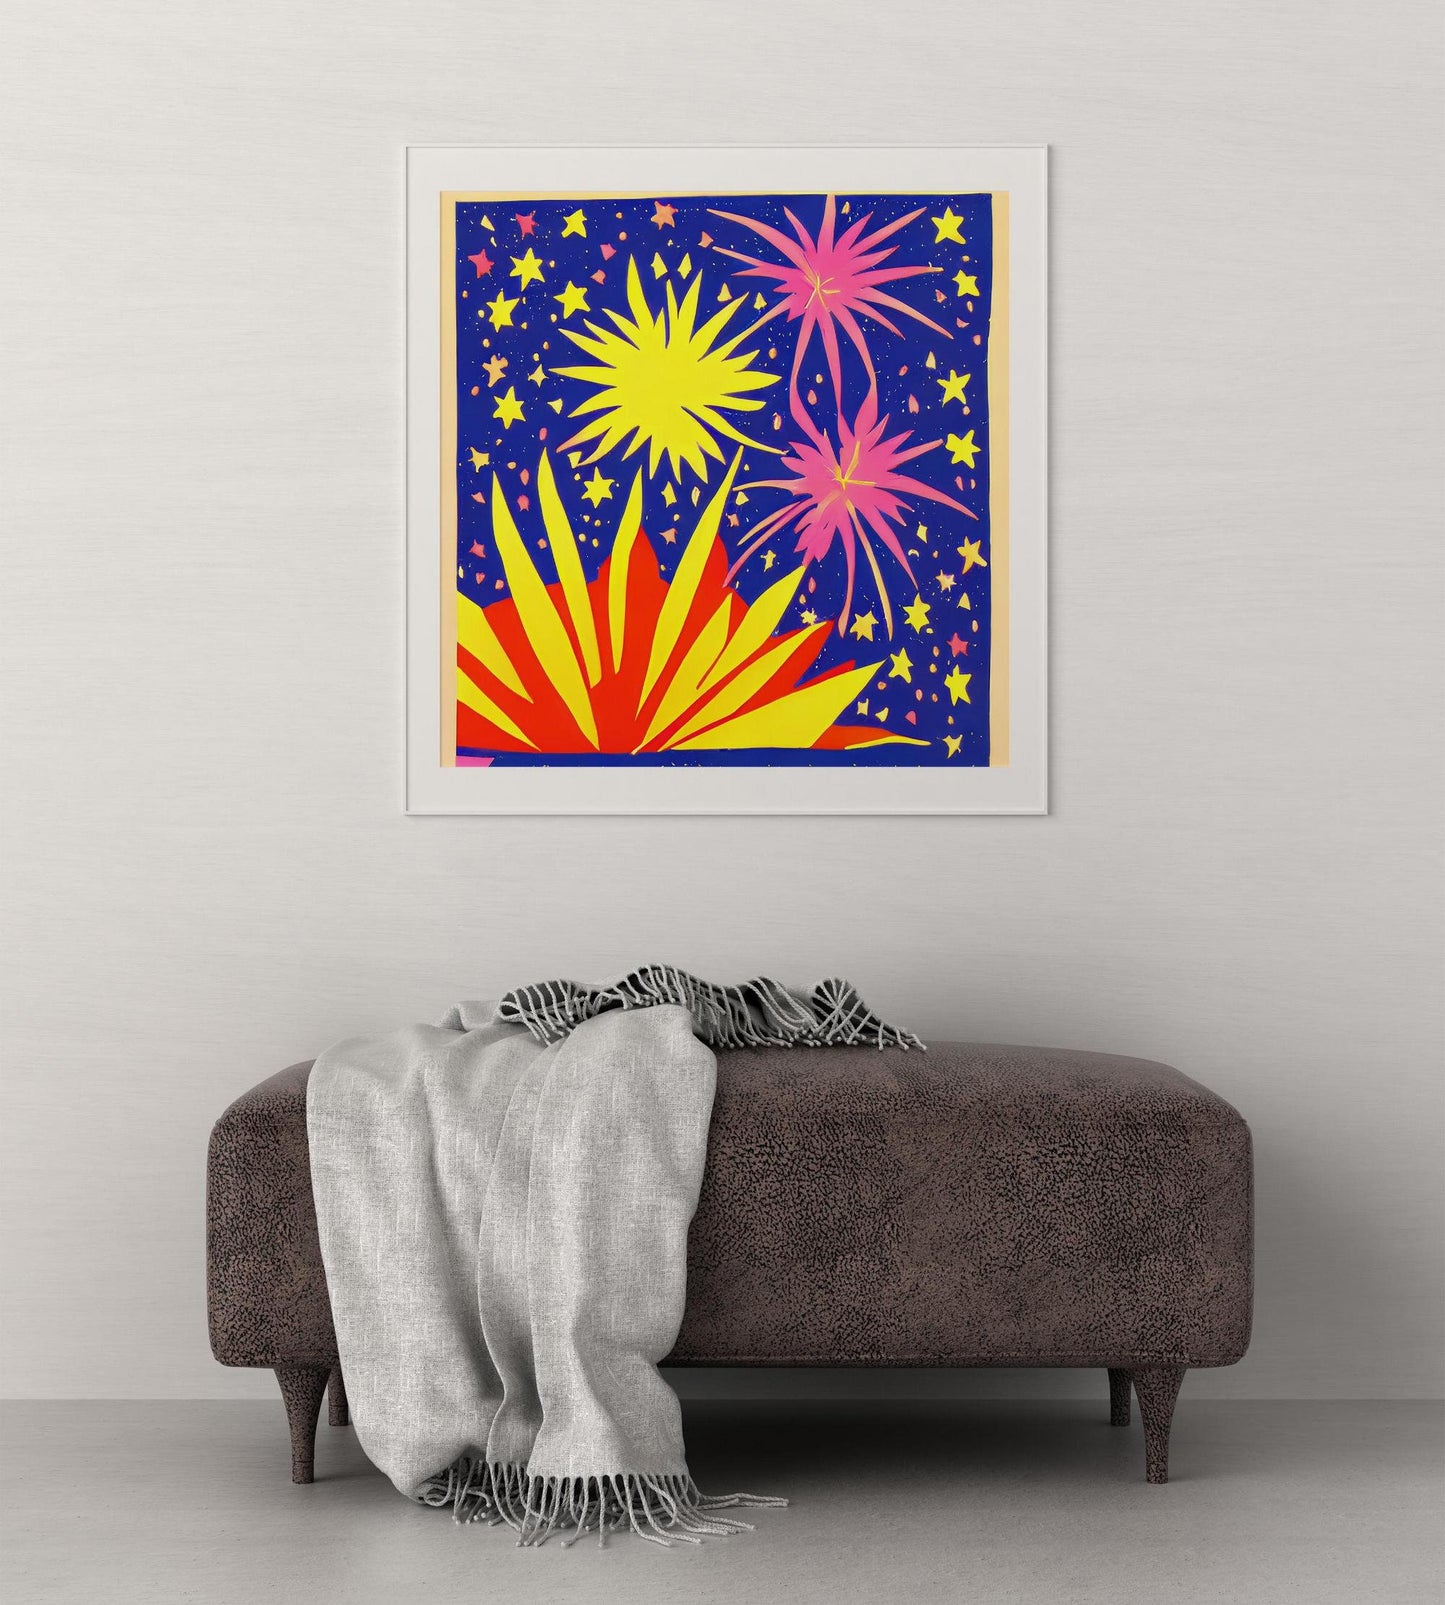 New Year'S Eve Fireworks In The Air Canvas Print, Prints, Abstract Print, Canvas Wall Art, Birthday Gift, Framed Canvas, Original Watercolor